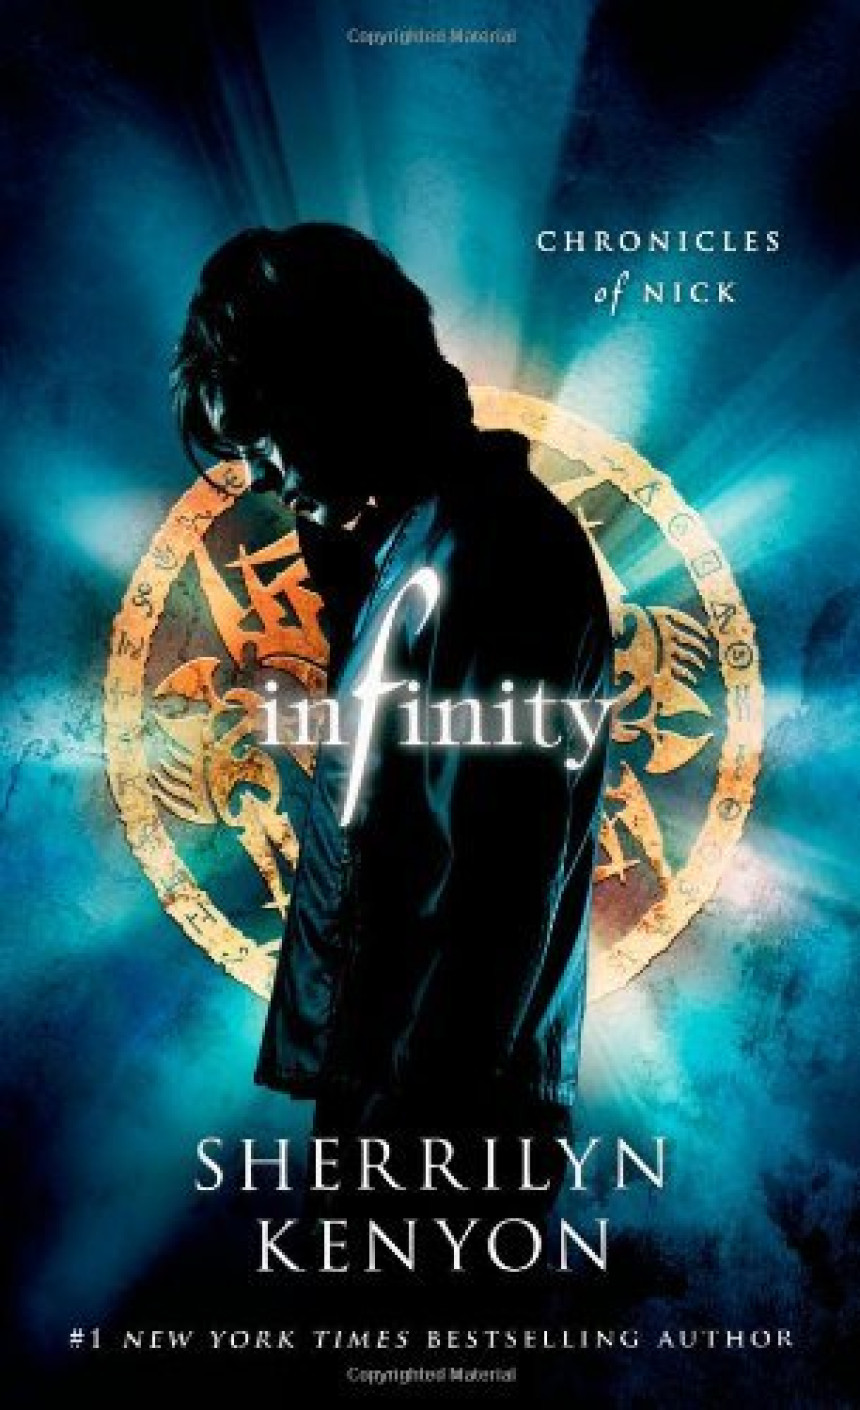 Free Download Chronicles of Nick #1 Infinity by Sherrilyn Kenyon